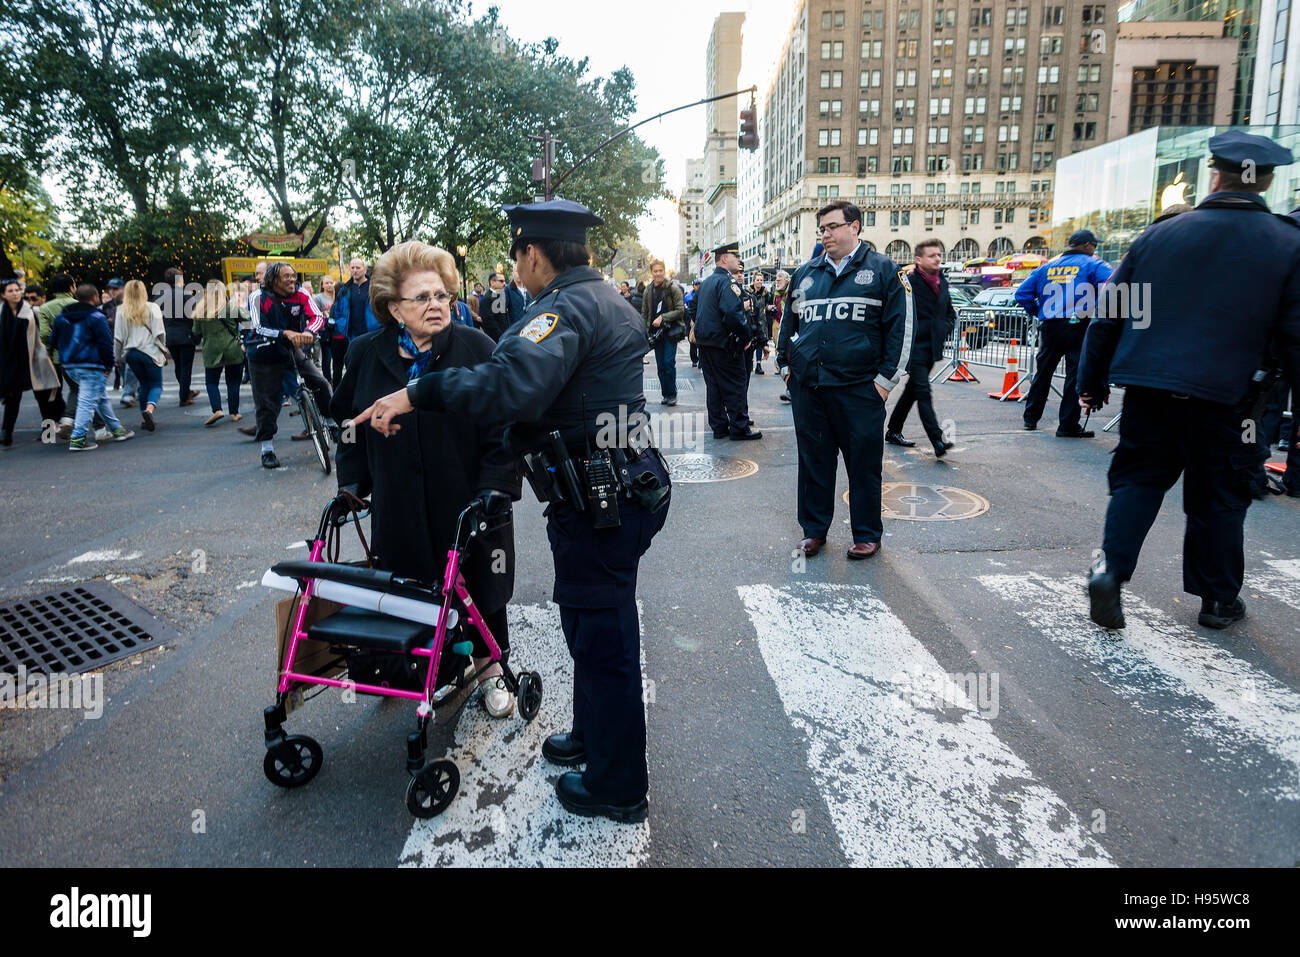 New York, USA 13 November 2016 - NYPD Police Officers prevent a woman with a walker from crossing Fifth Ave due to security around Trump tower, home of President Elect Donald Trump. New York City Mayor Bill deBlasio and the Secret Service announced traffic closures and security meansure for the time when the President Elect is in town, leading up to the inauguration, and said the City would seek Federal reinbursement for security costs. Stock Photo